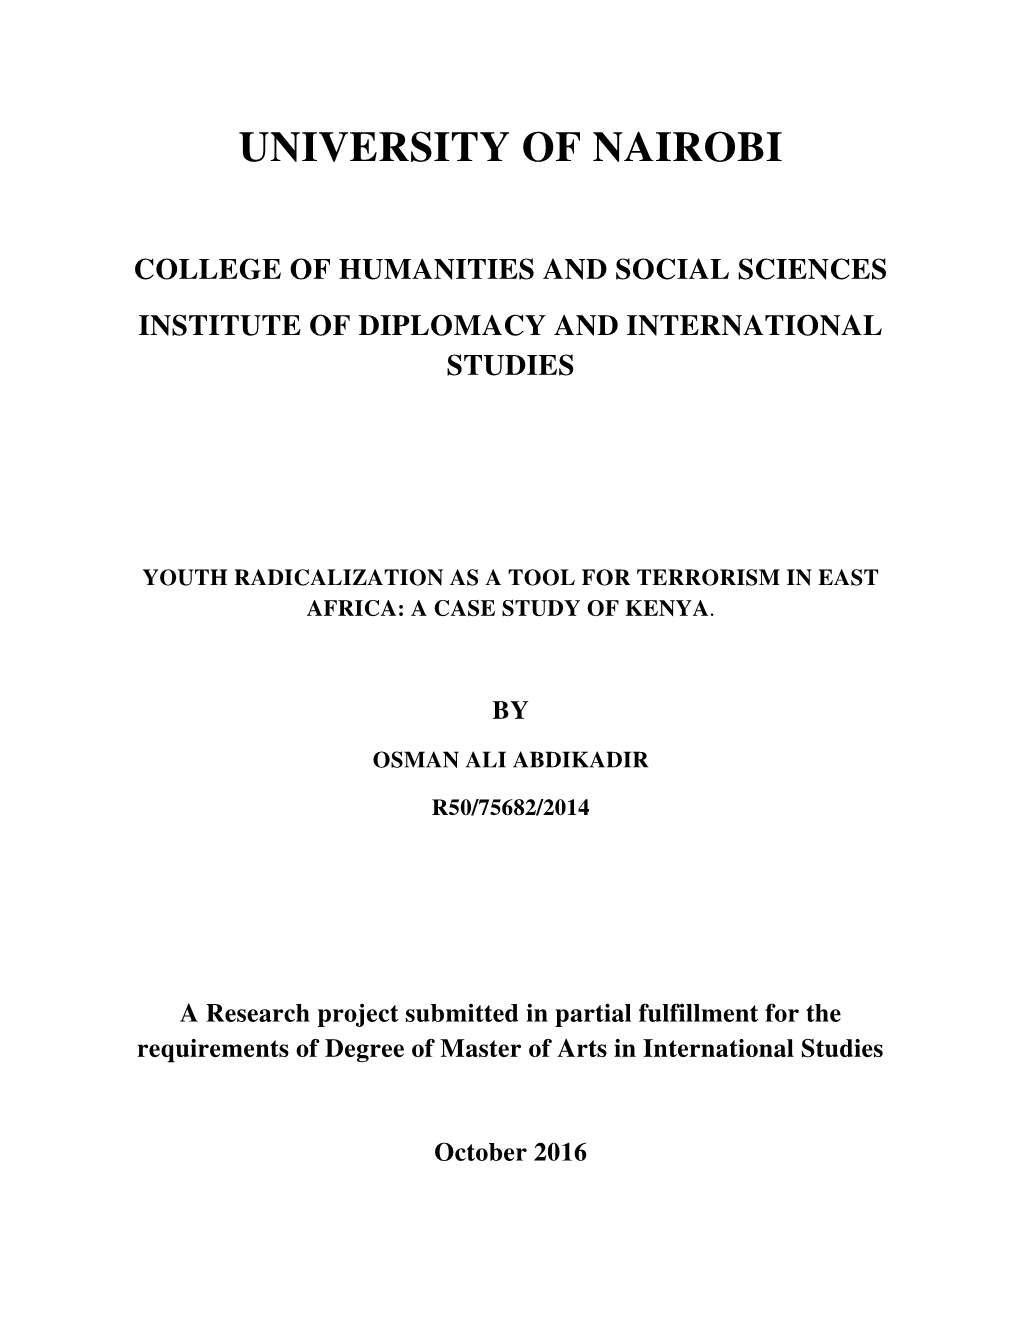 Youth Radicalization As a Tool for Terrorism in East Africa: a Case Study of Kenya